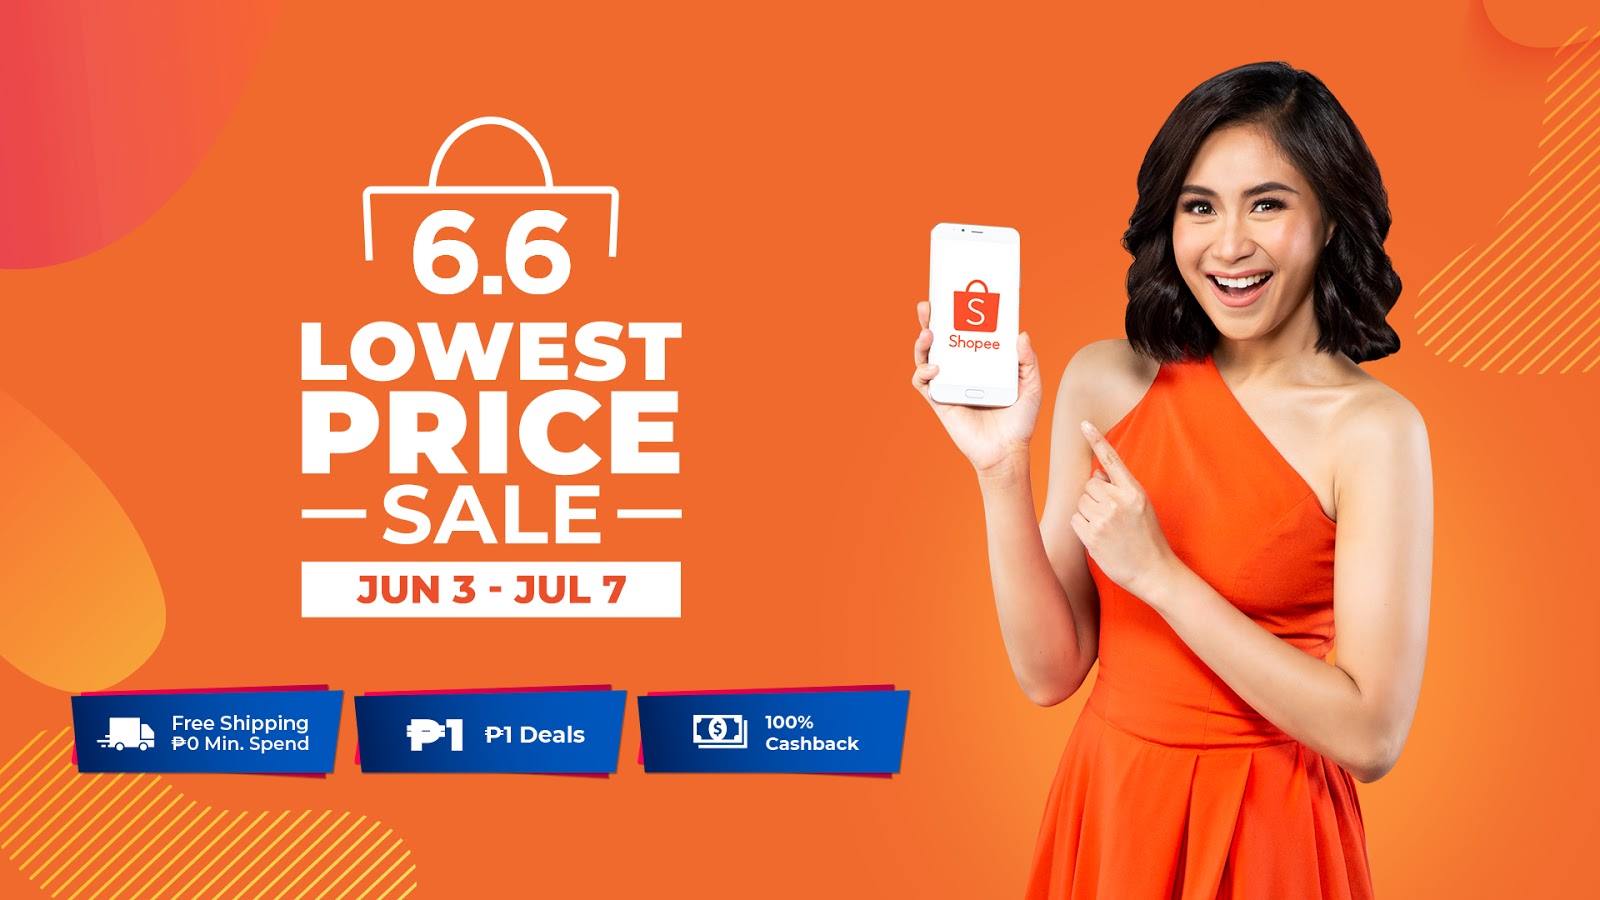 Shopee Discount Voucher and Shopee Discount Codes for Shopee Philippines  6.6 Lowest Price Sale! - YeyAndie Blog